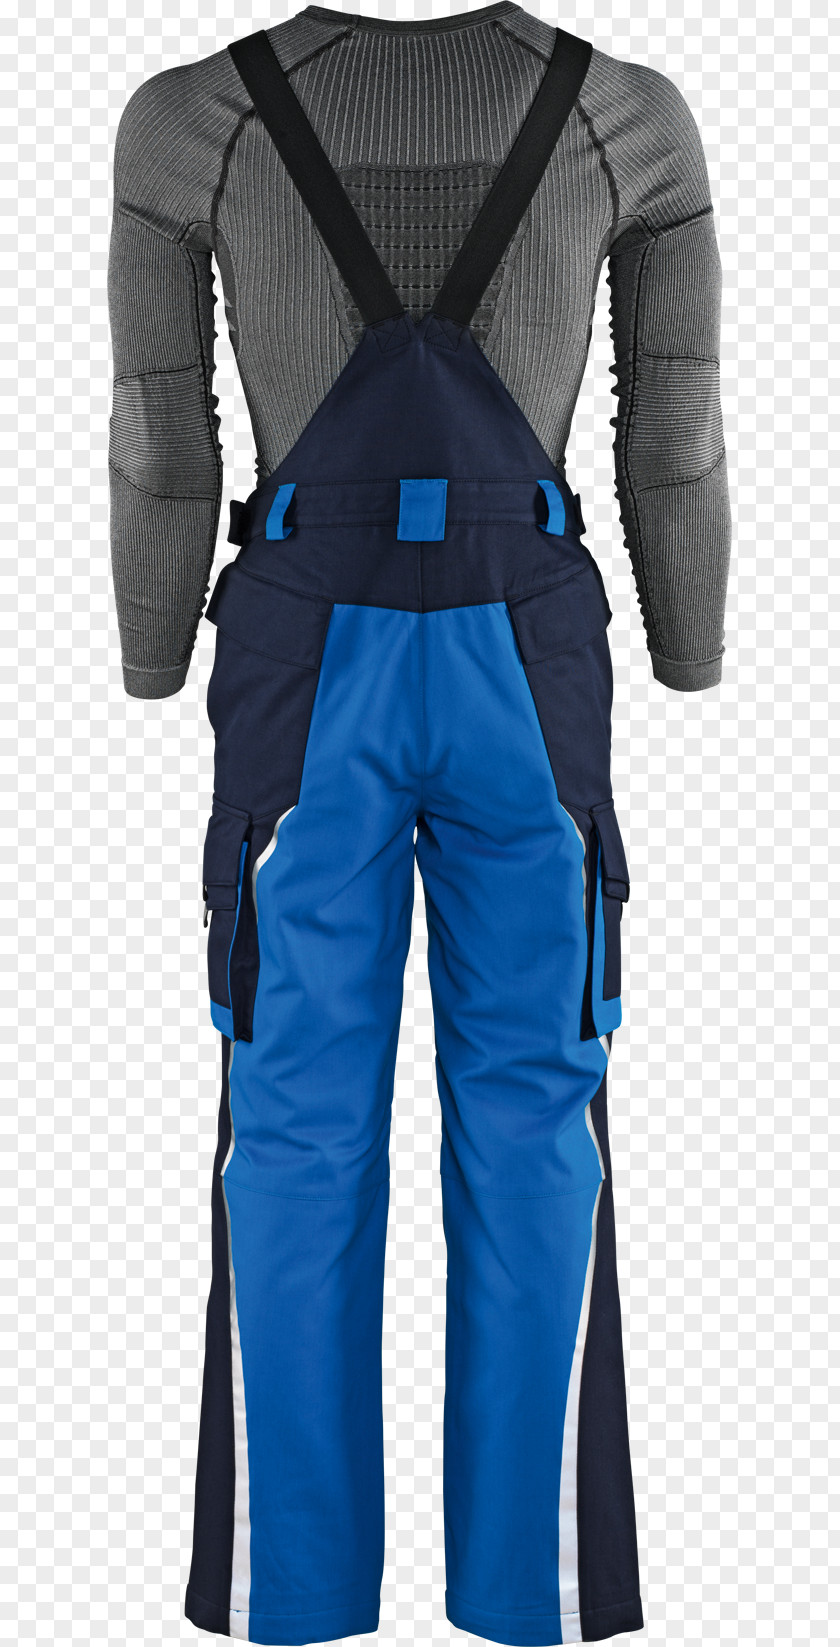 Flash Material Dry Suit Hockey Protective Pants & Ski Shorts Overall PNG